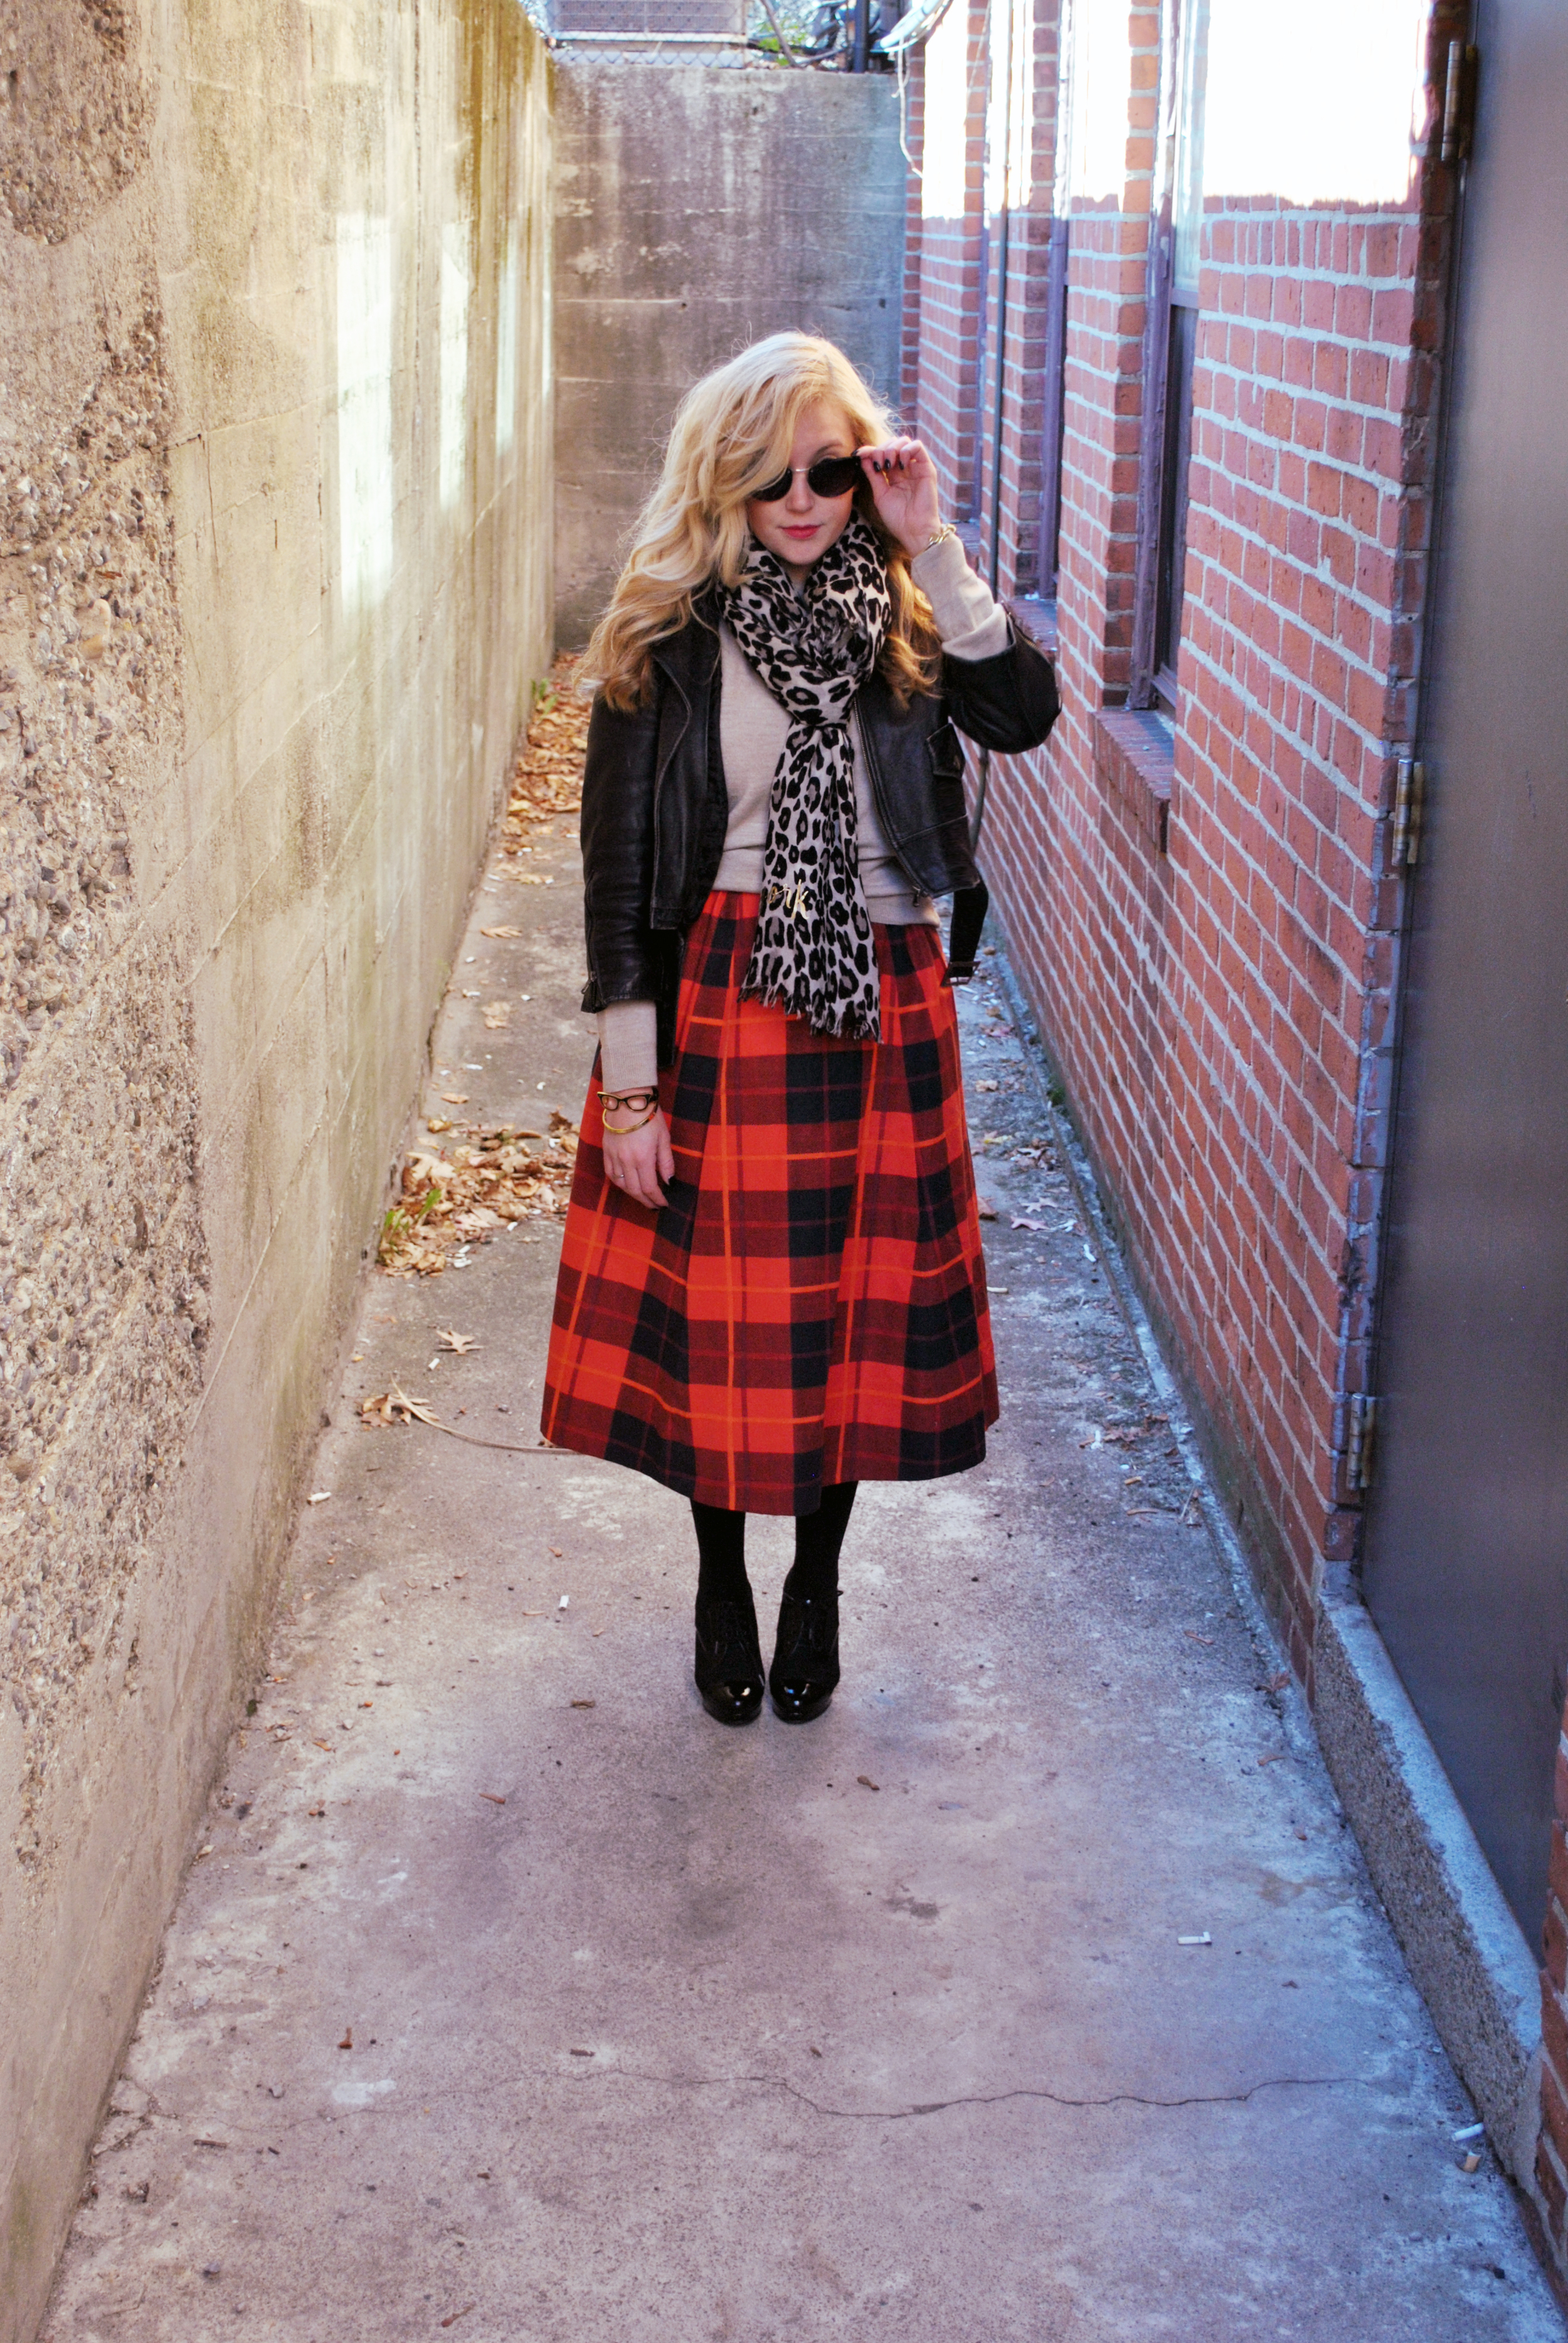 thoughtfulwish | kate spade // plaid skirt // camel // moto jacket // leopard print scarf // preppy outfit // rocker outfit